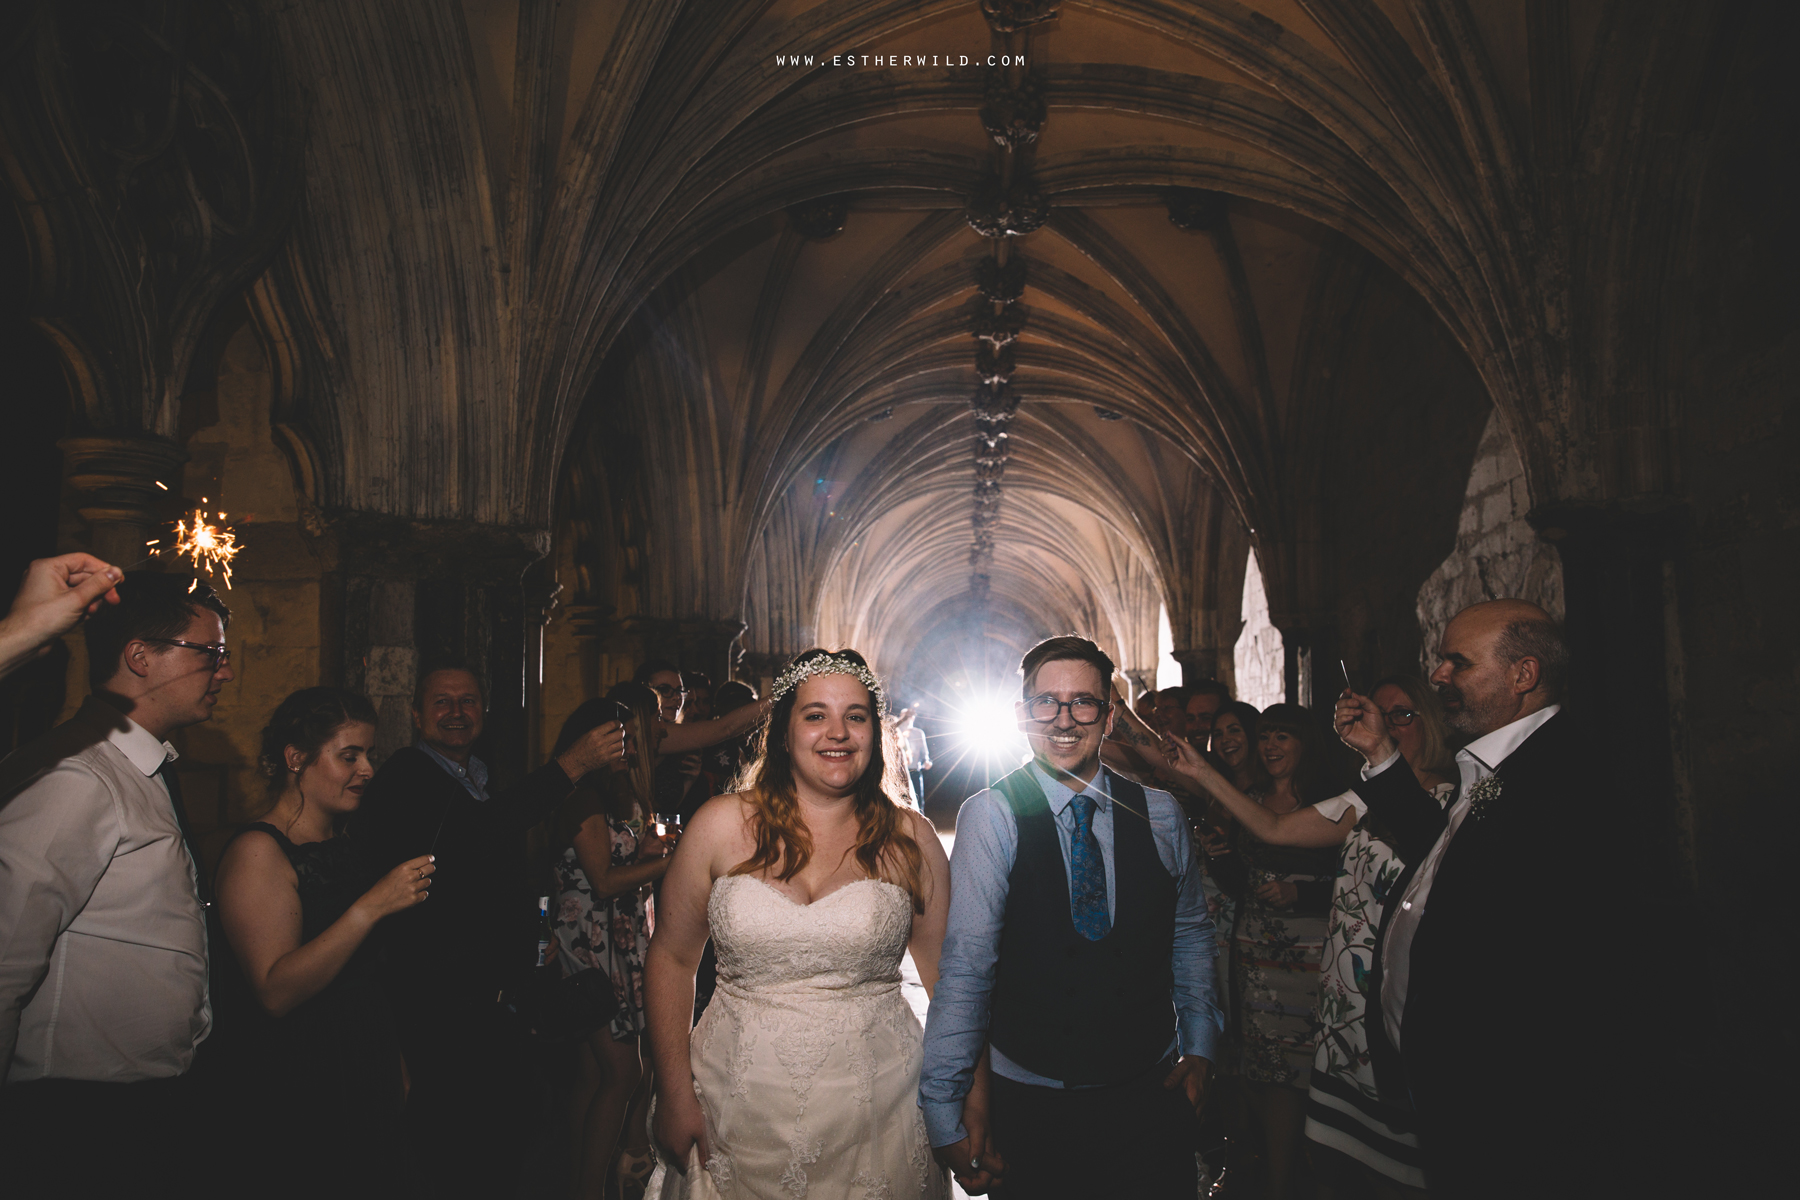 Norwich_Castle_Arcade_Grosvenor_Chip_Birdcage_Cathedral_Cloisters_Refectory_Wedding_Photography_Esther_Wild_Photographer_Norfolk_Kings_Lynn_3R8A3659.jpg